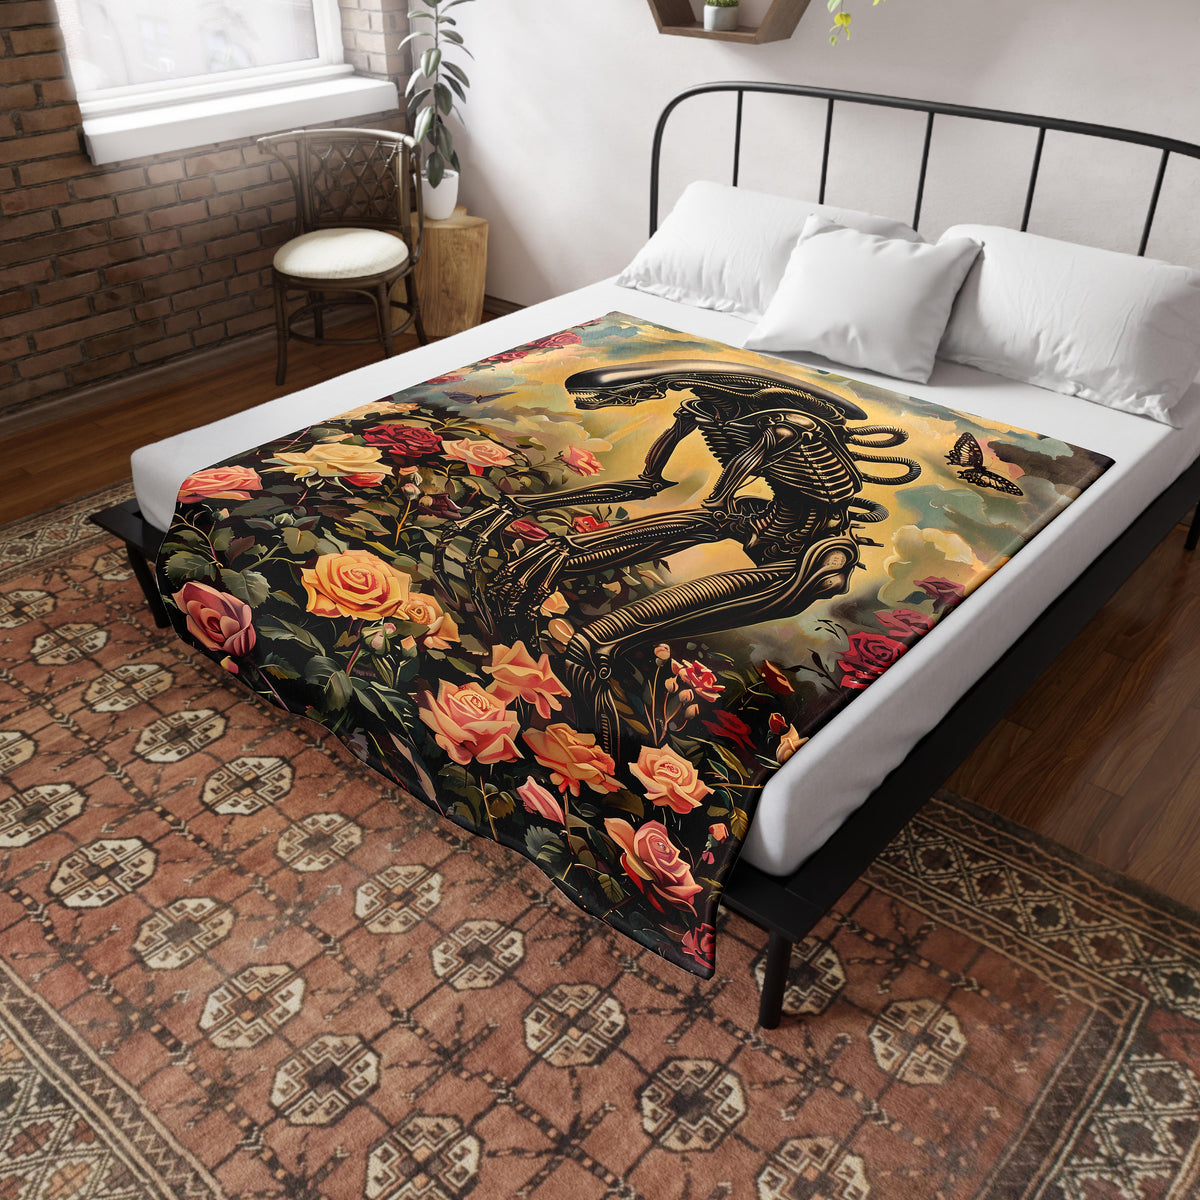 a bed with a dragon and flowers on it